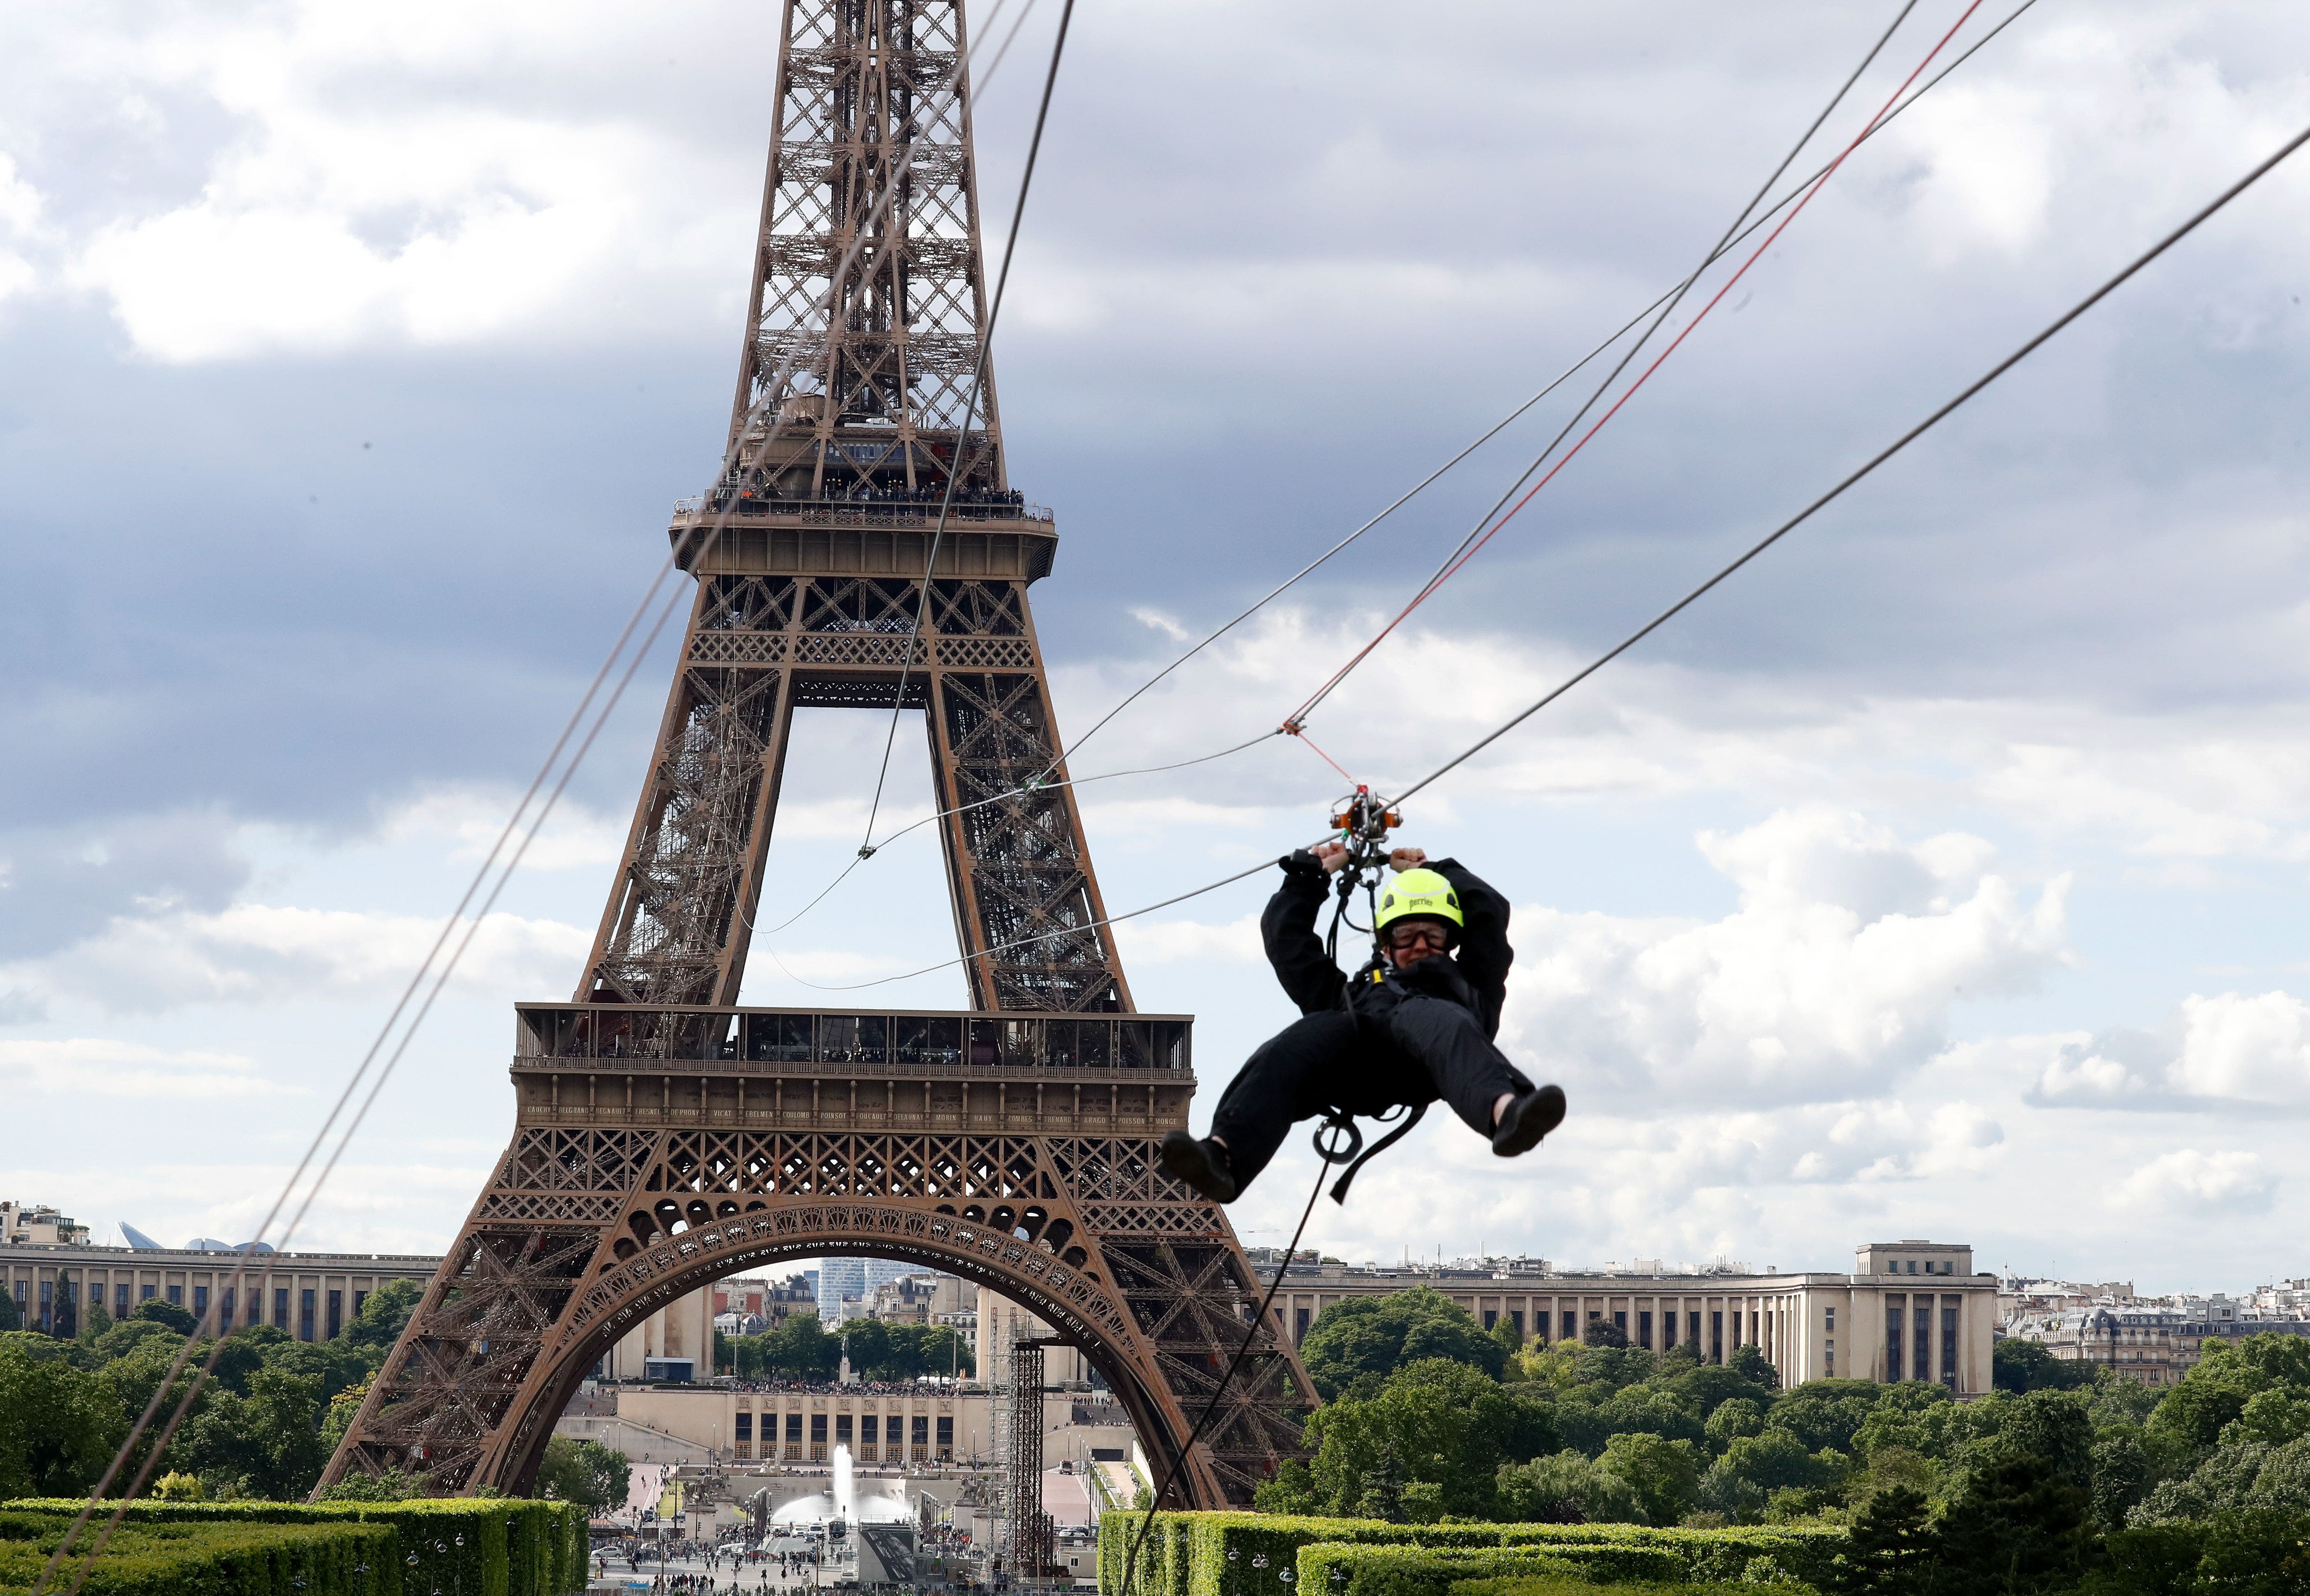 FOX NEWS: Zip line set up at Eiffel Tower for thrill-seekers